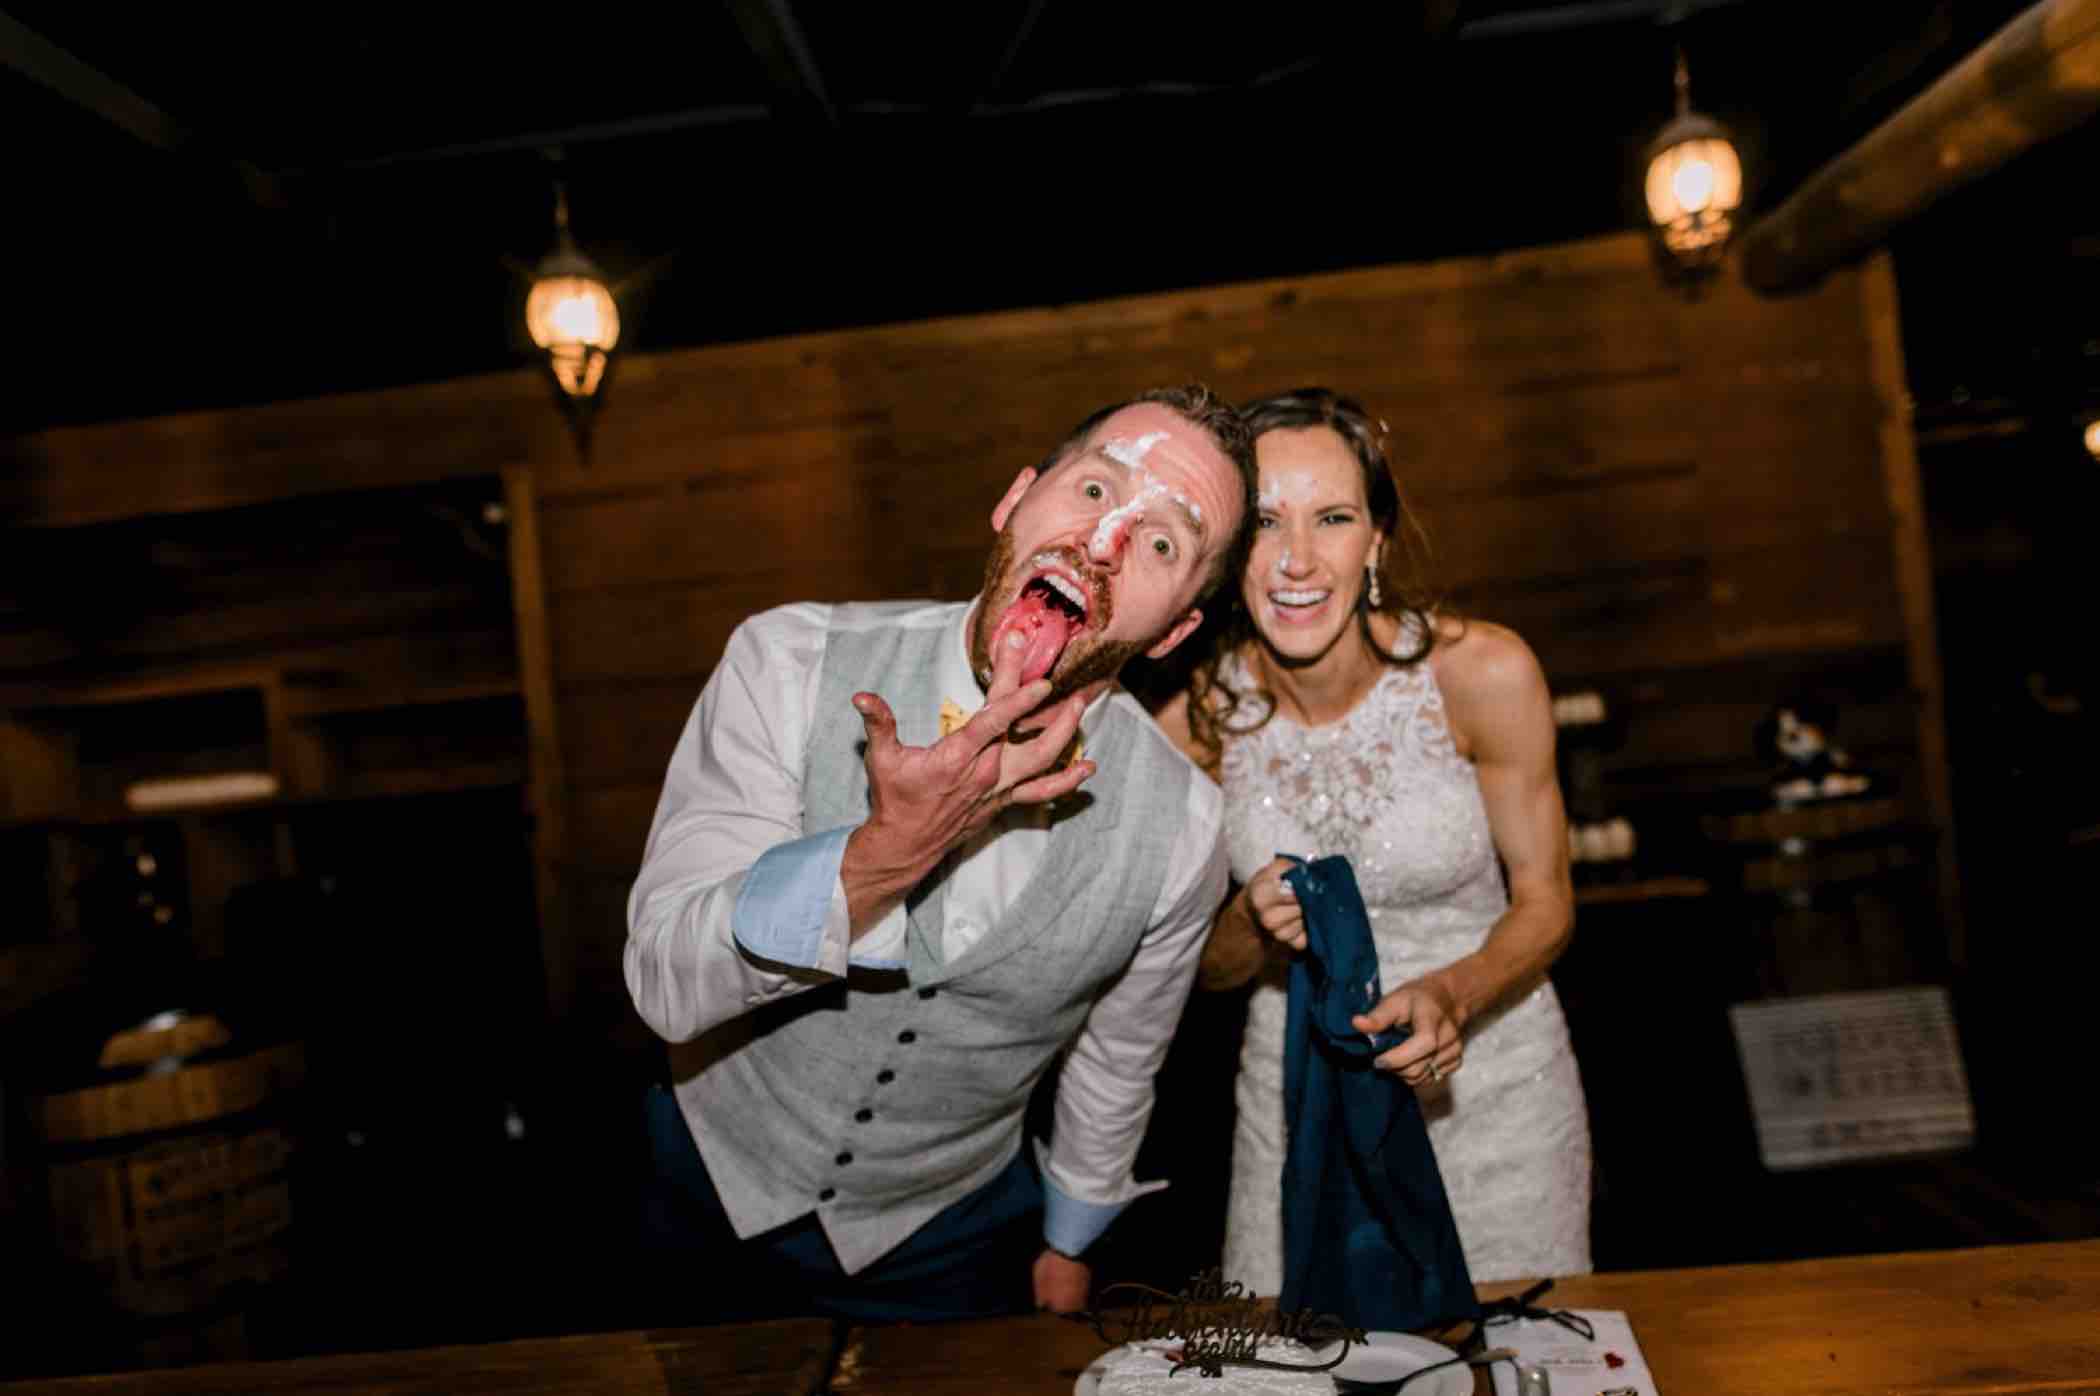 Bride and groom celebrate cutting their cake and smashing it into each other's faces at Piney River Ranch in Vail, Colorado. Photo by Ali and Garrett, Romantic, Adventurous, Nostalgic Wedding Photographers.